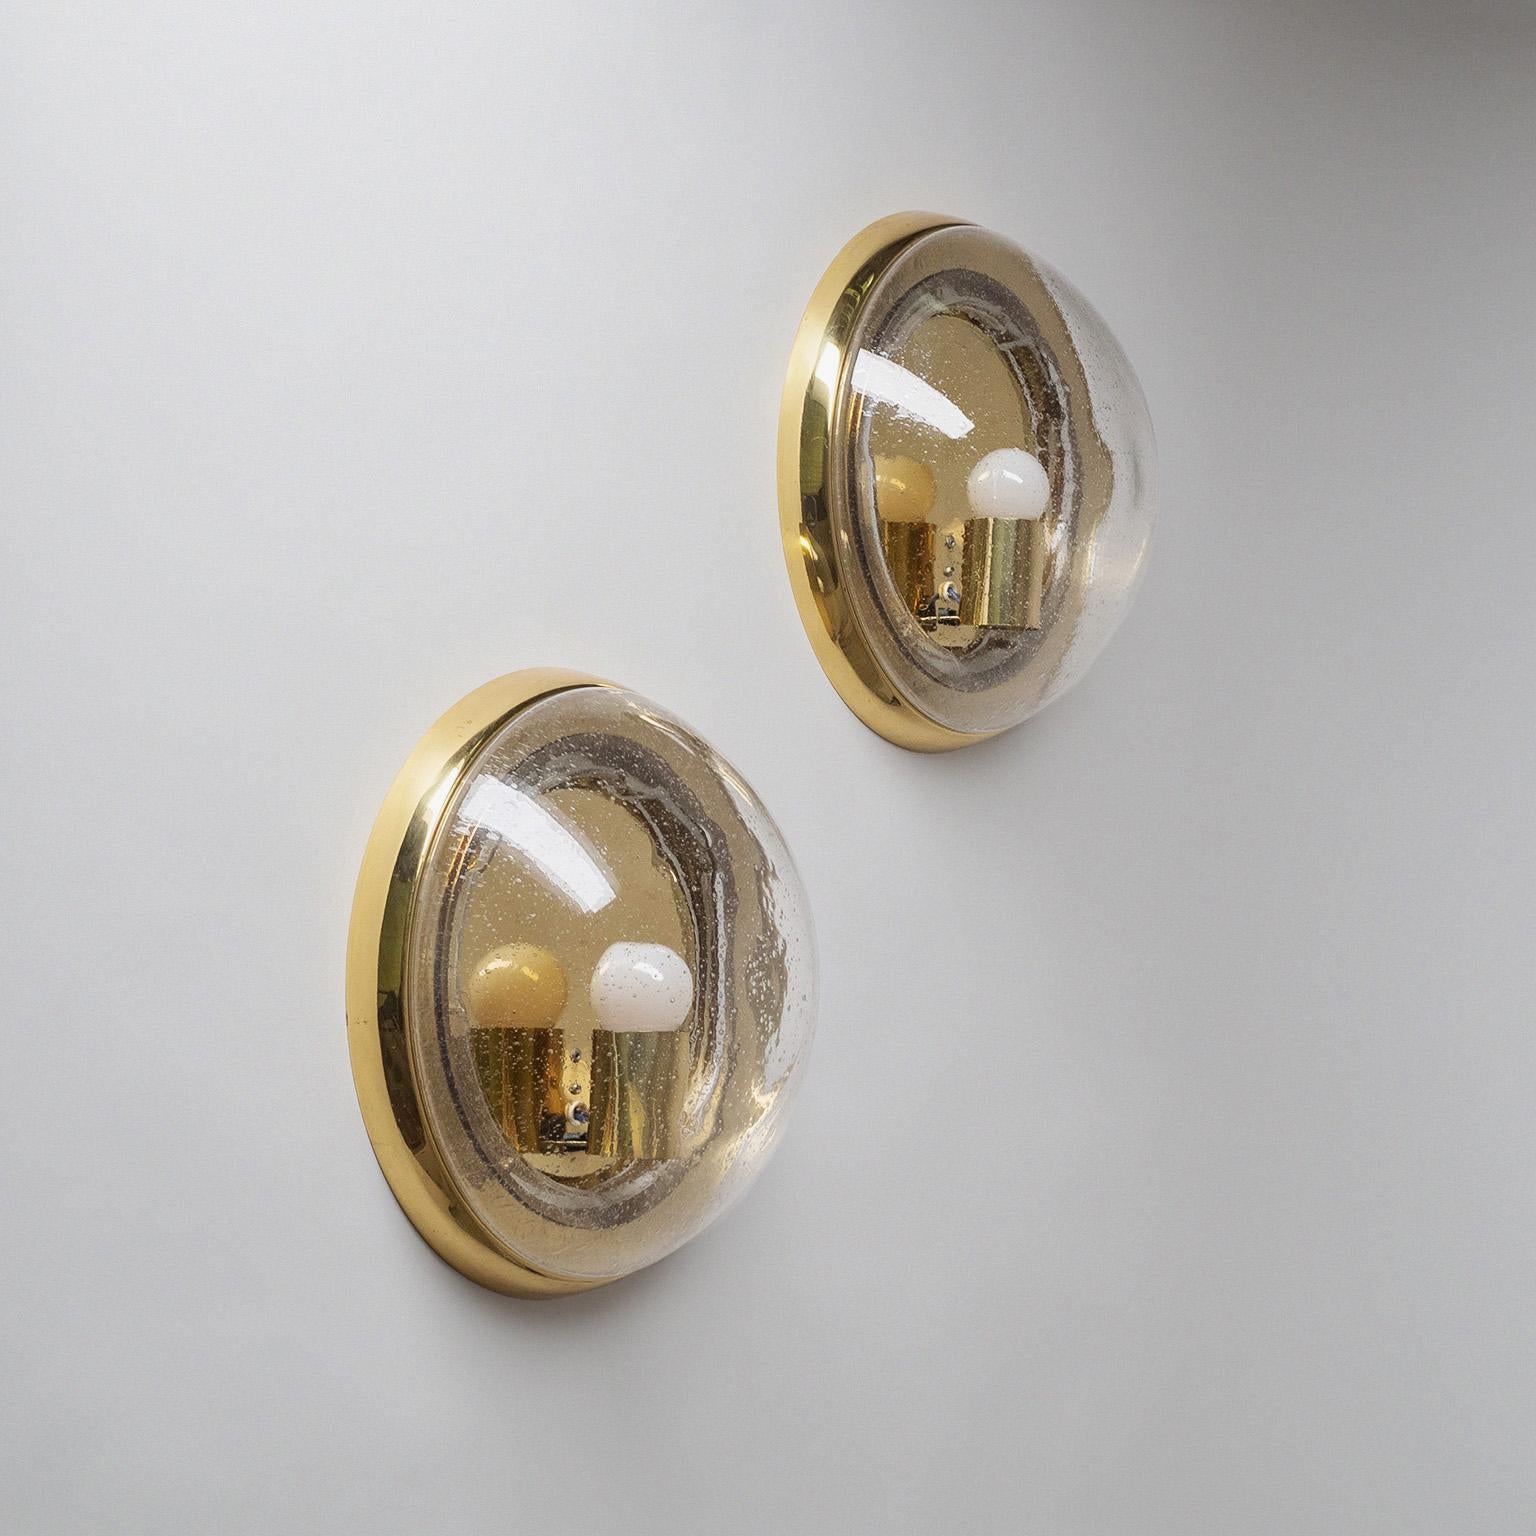 Pair of large brass ‚bullseye‘ wall lights by Hillebrand, Germany from the 1970s. The blown clear glass domes are filled with small bubbles and have a slightly irregular surface contrasting nicely with the smooth brass hardware. Very good original